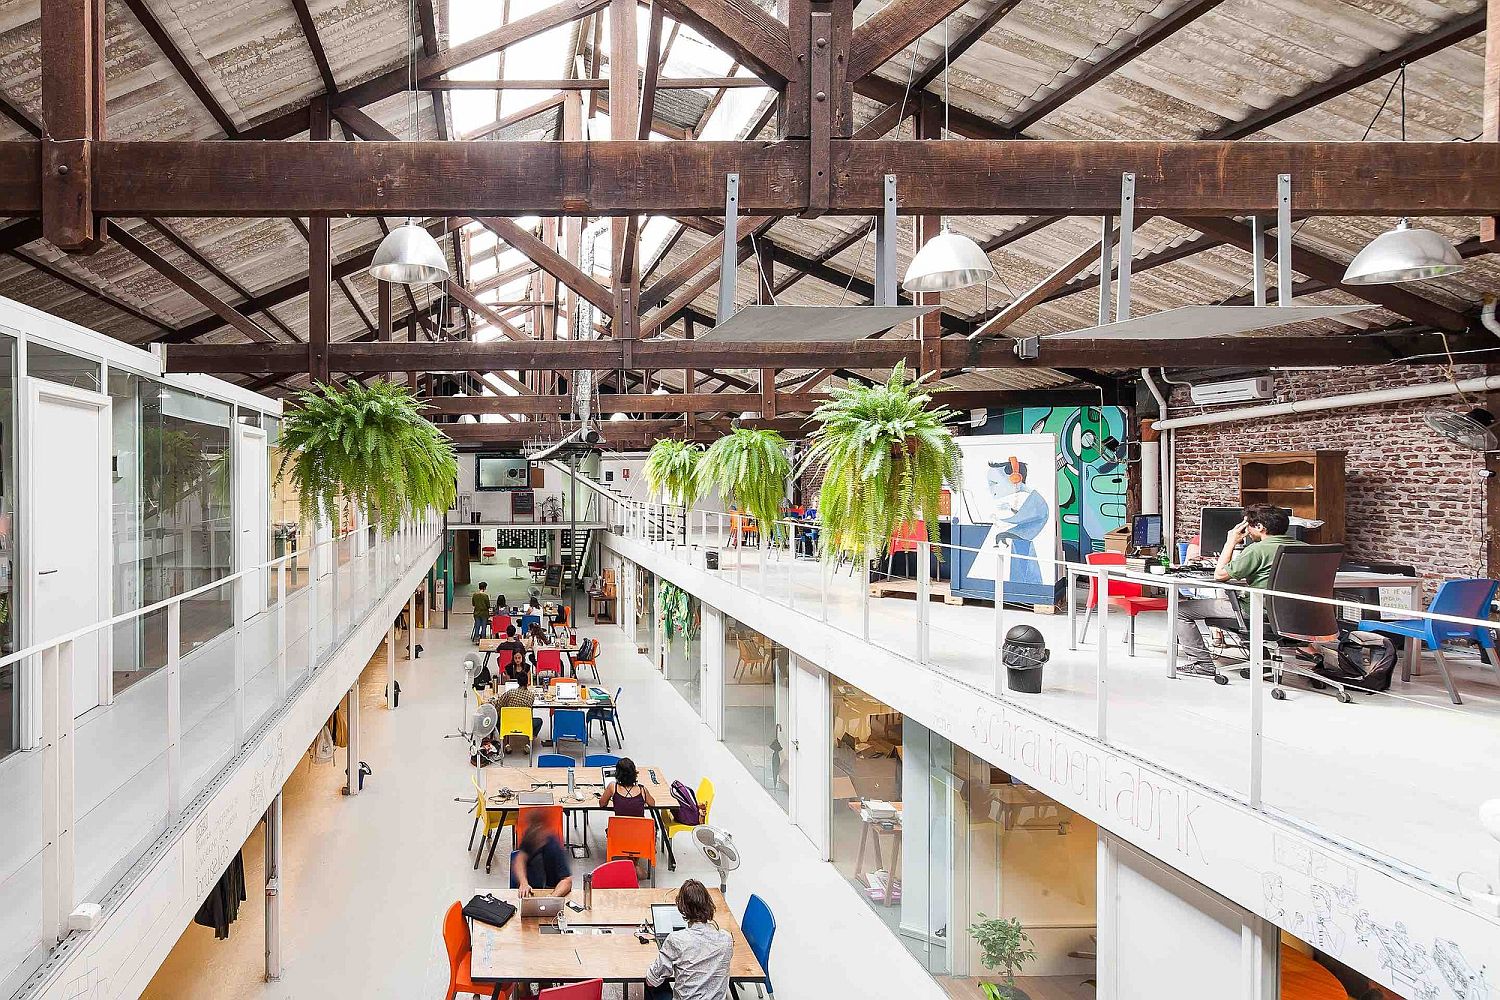 Sinergia Cowork Palermo: Adaptive Reuse at its Industrial Best